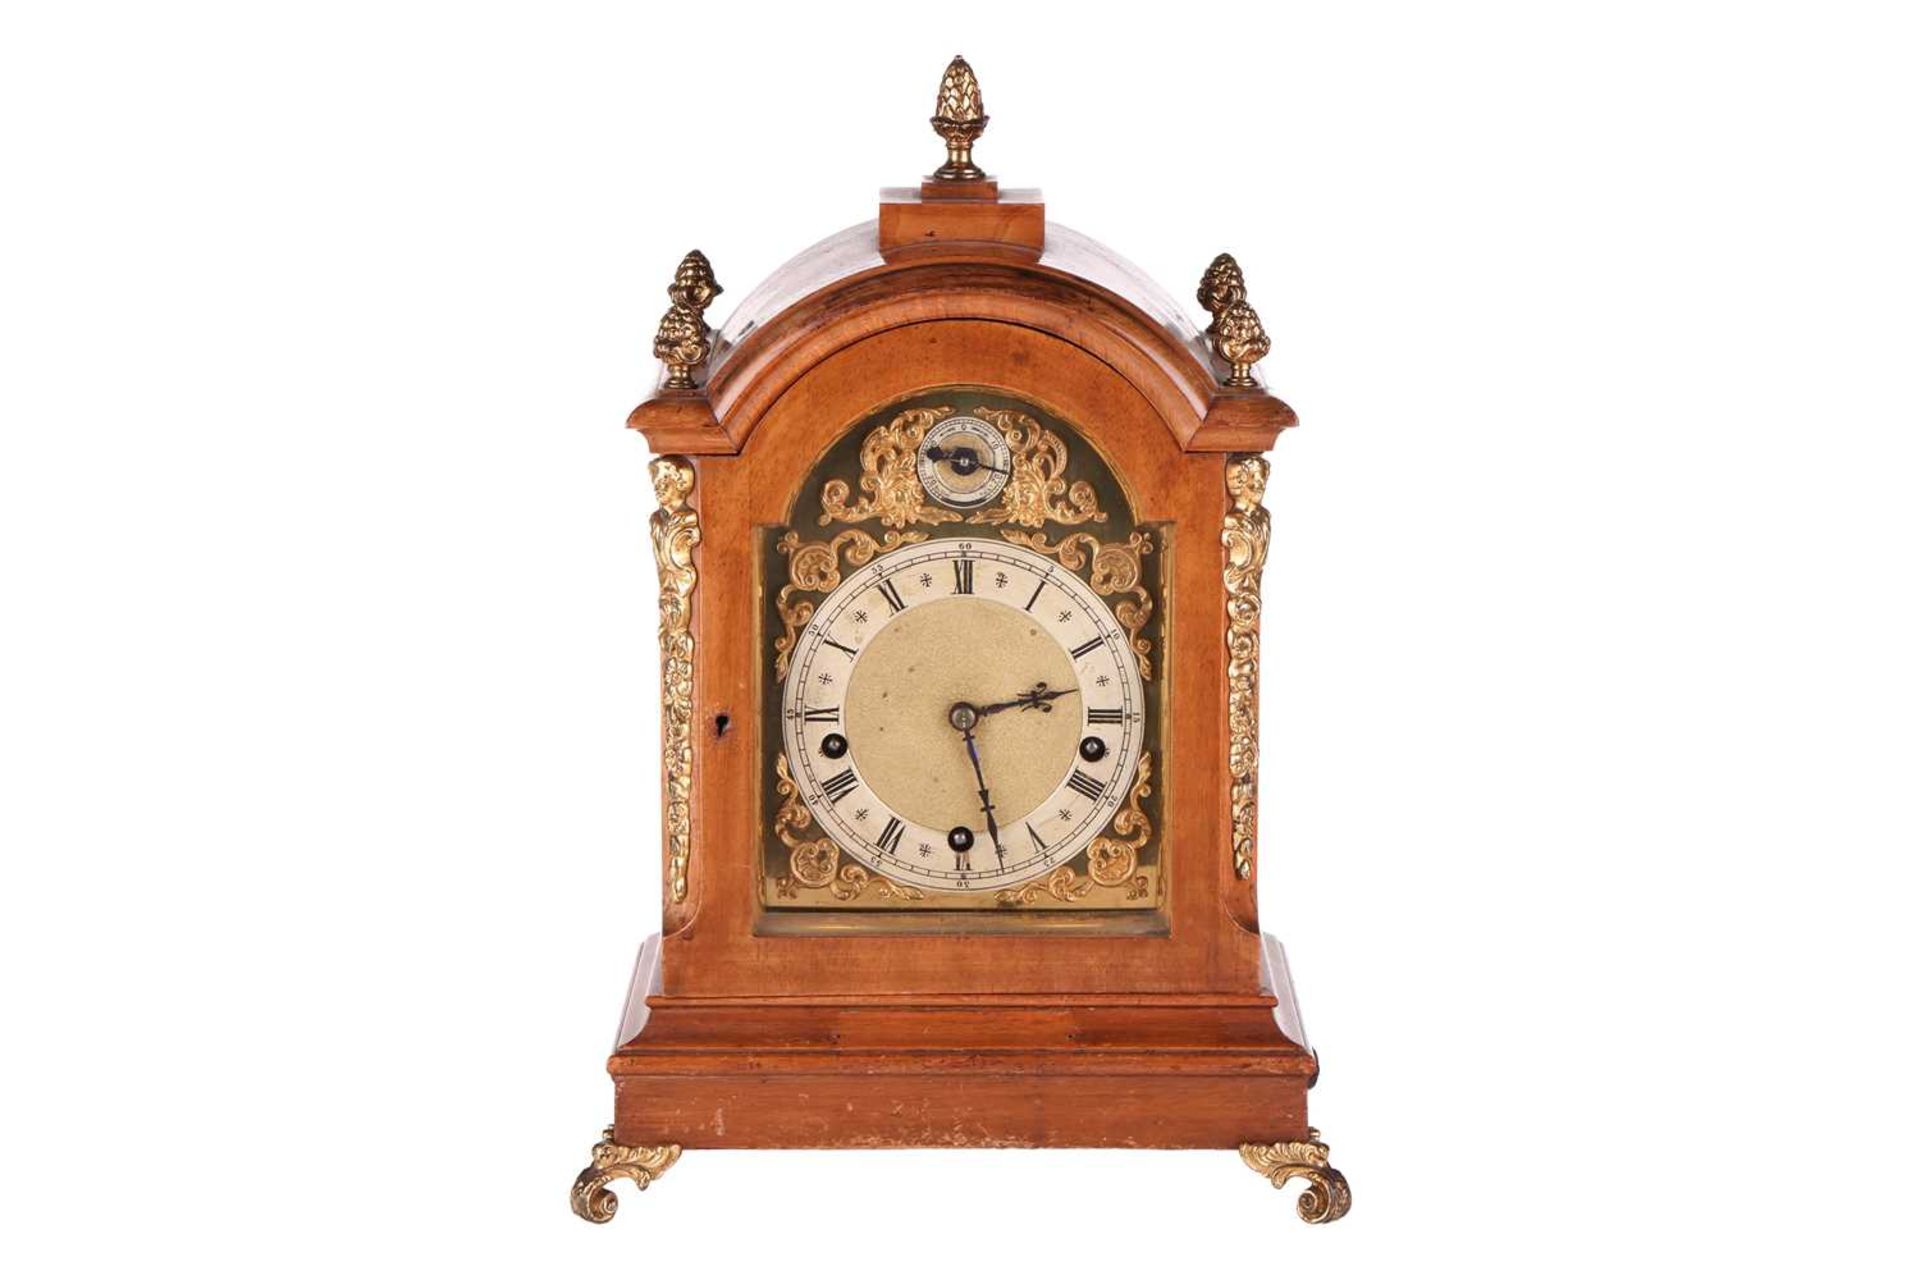 An early 20th-century W&amp;H (Winterhalter &amp; Hoffmeister) 8-day triple train mantel clock with 